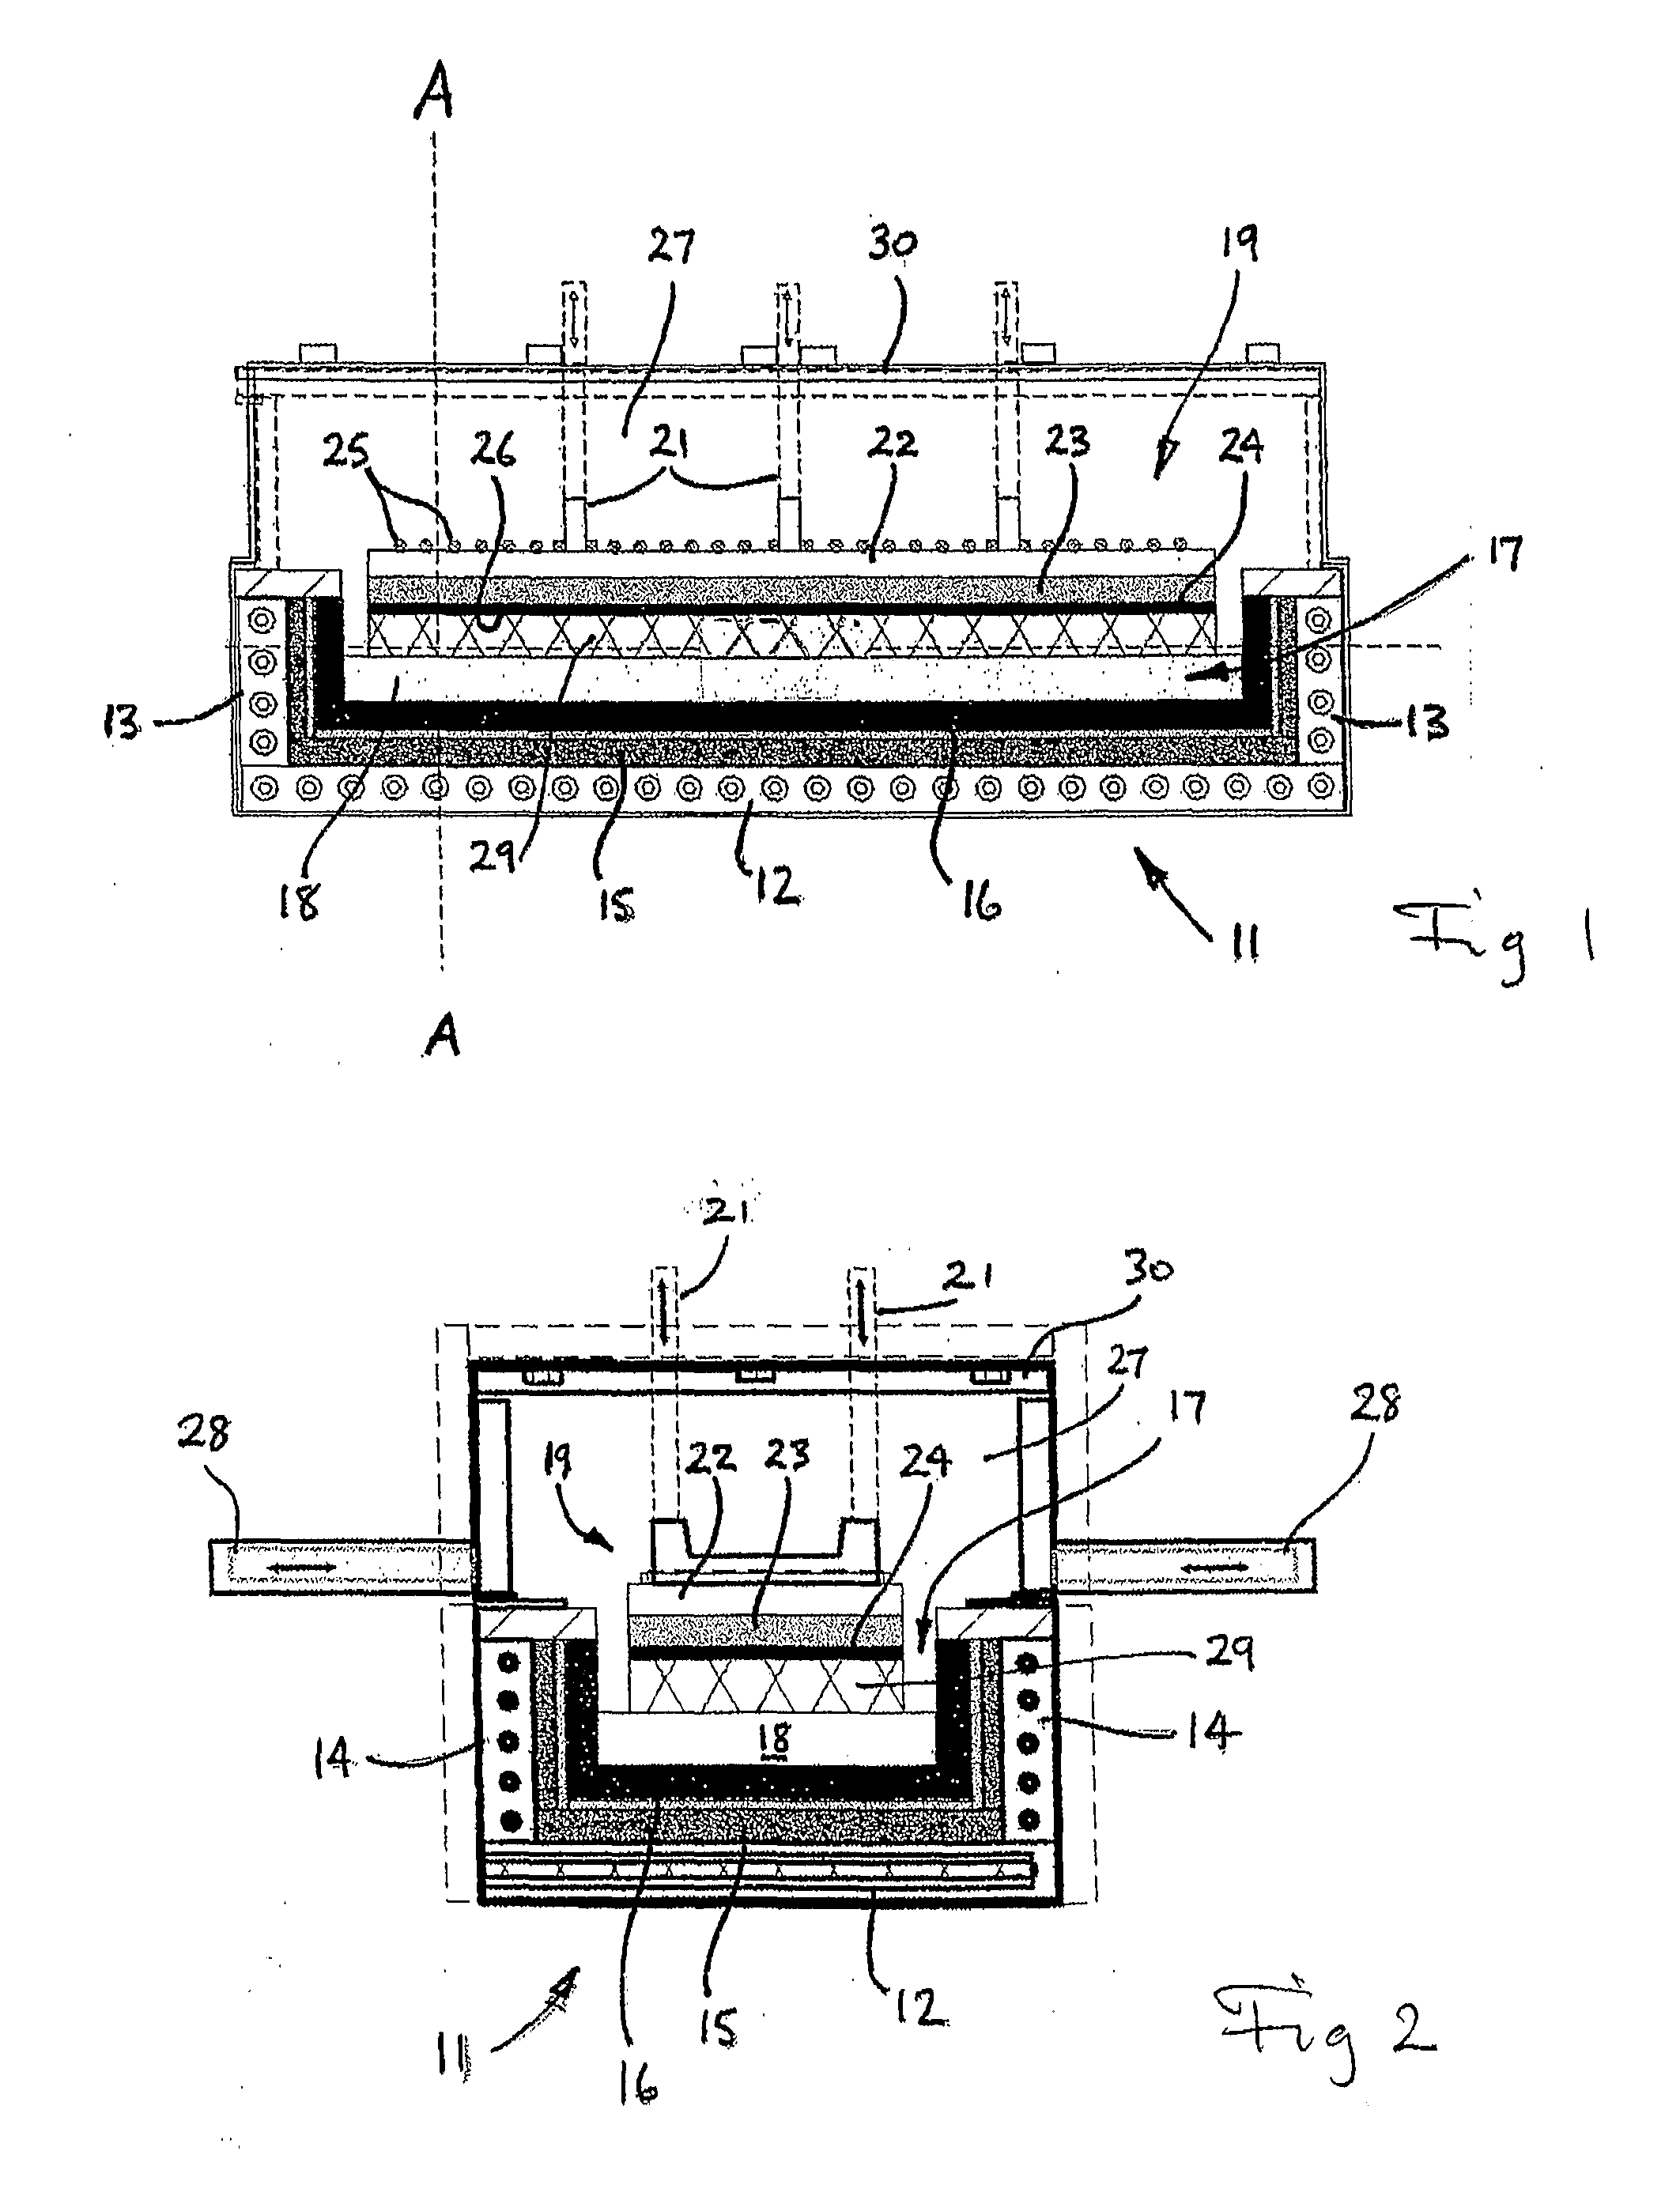 Method And Apparatus For Refining A Molten Material